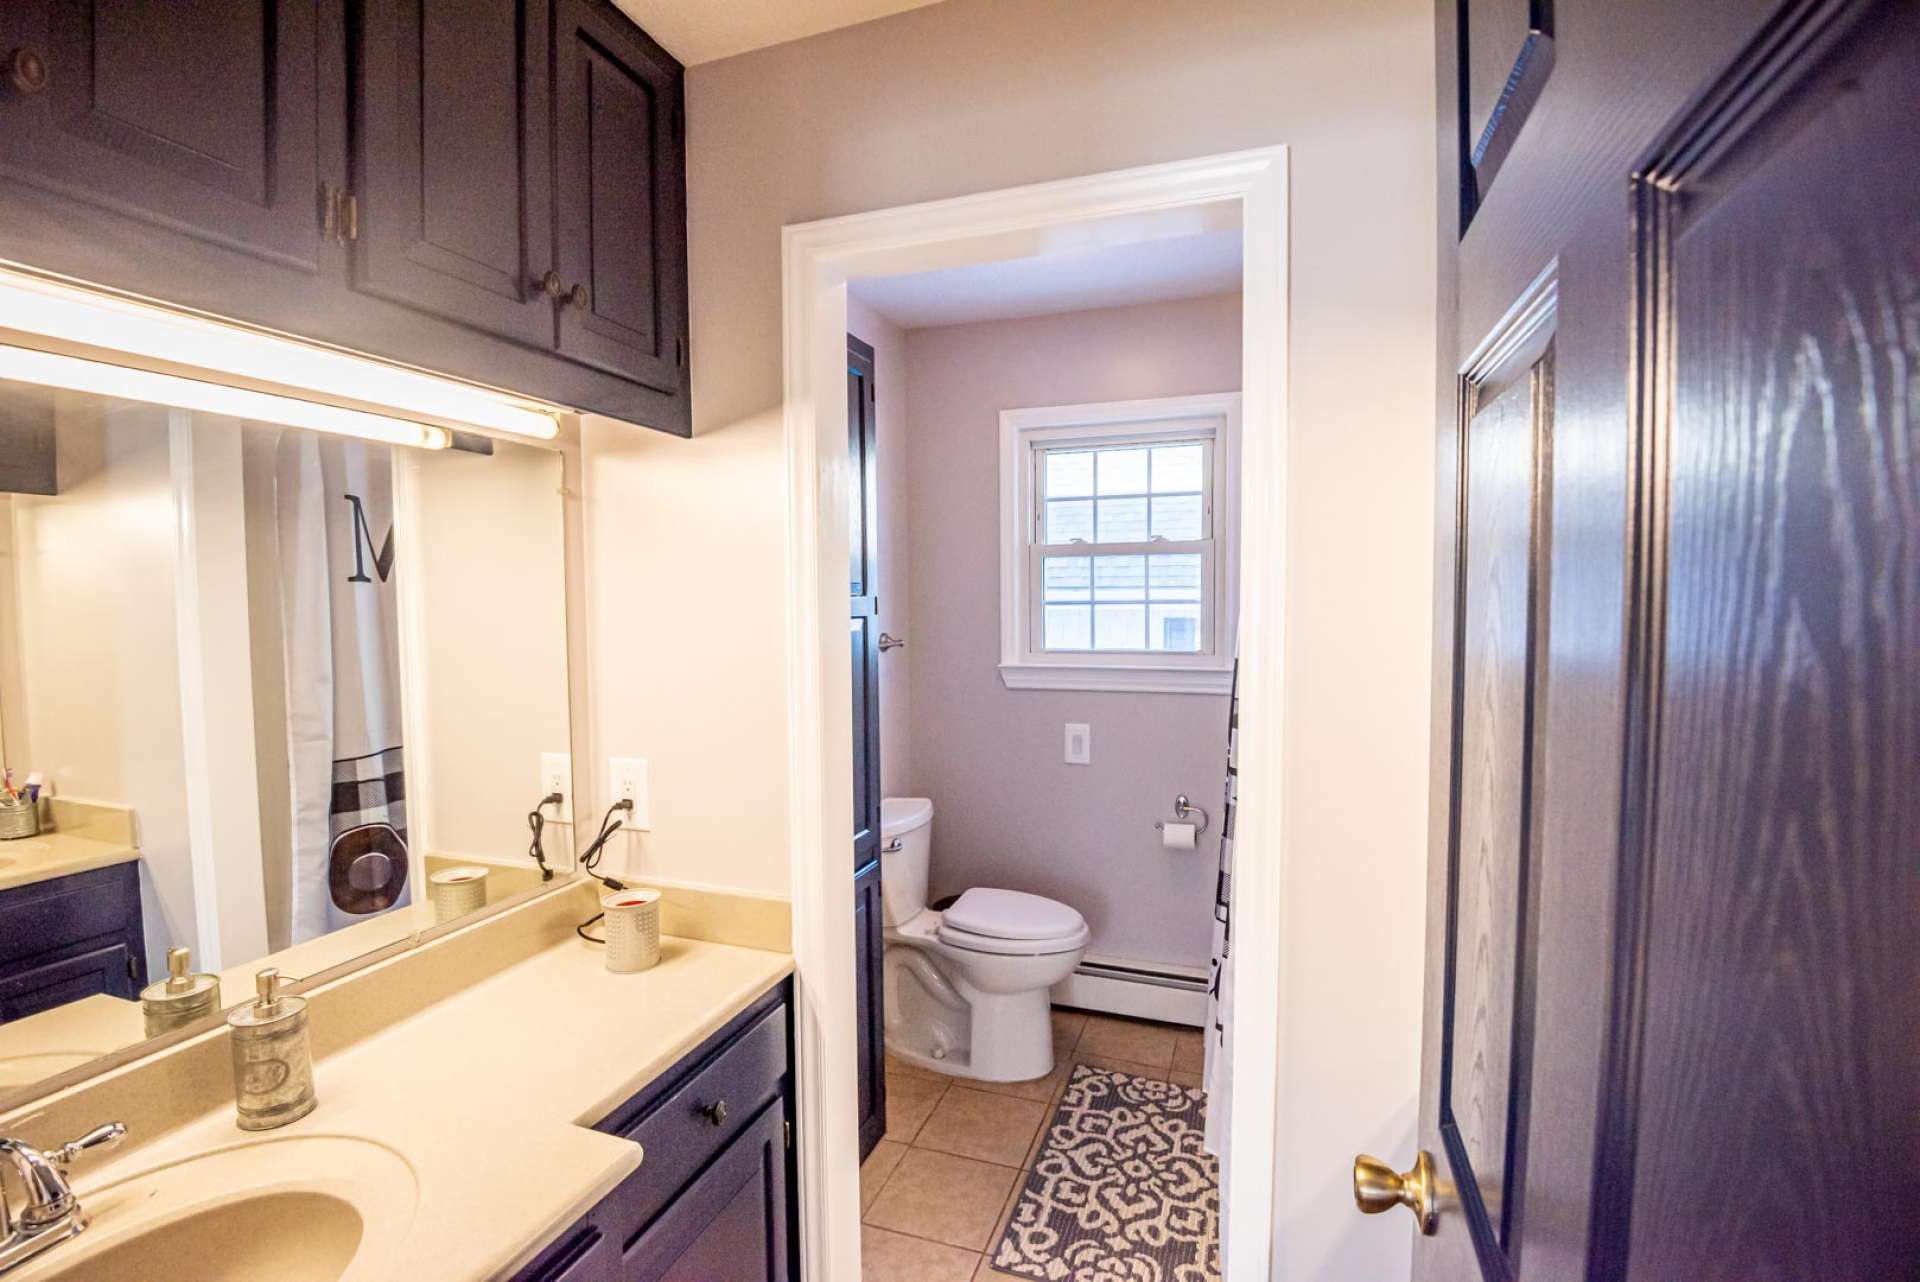 "His" bathroom offers a double vanities and tile flooring.